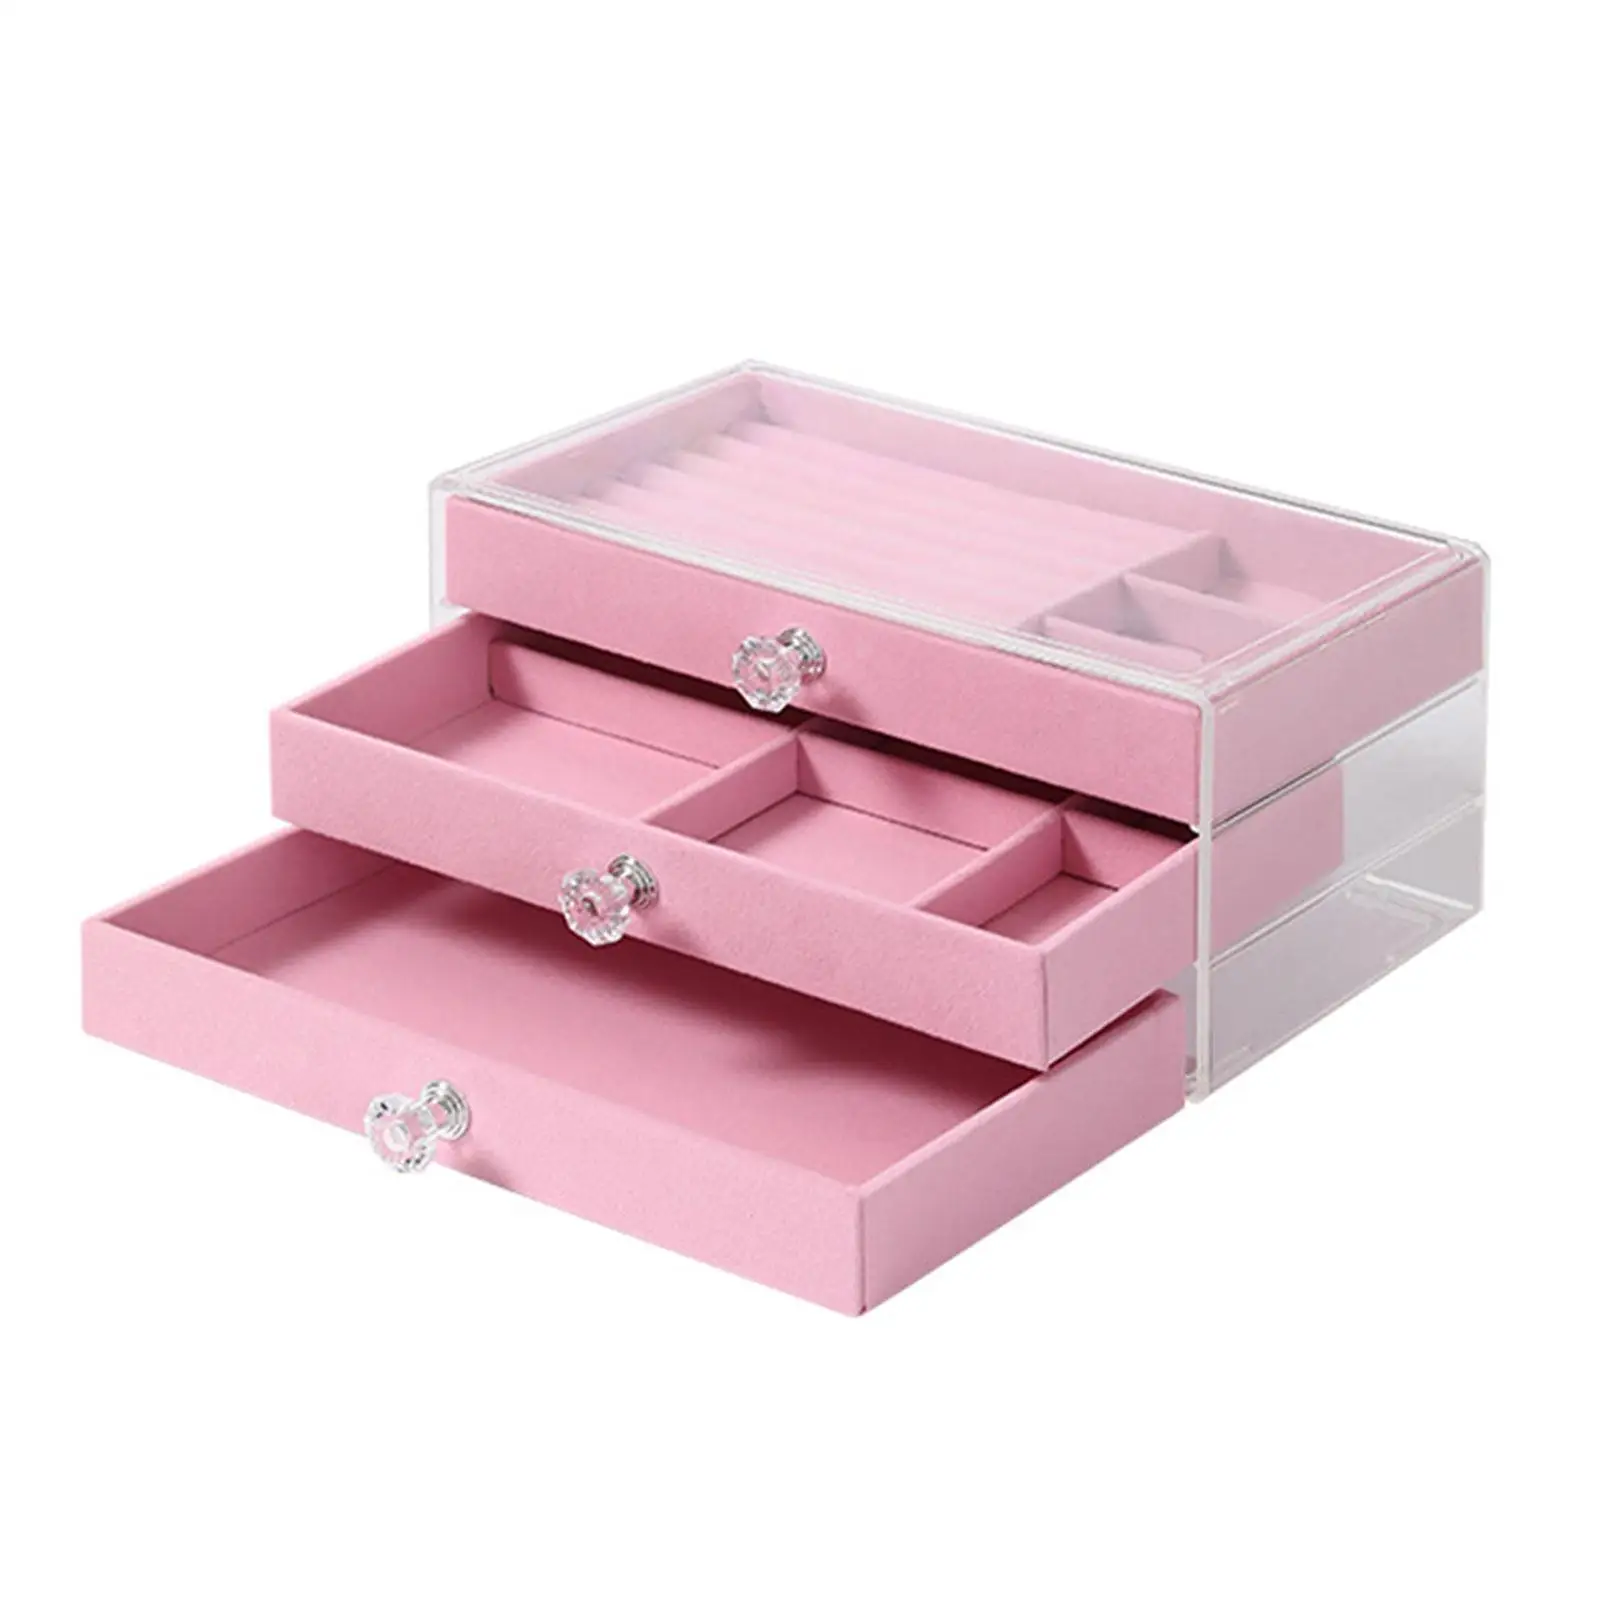 

Portable Jewelry Box Jewelry Storage Case Earrings Mirrored Velvet Lined Jewelry Organizer for Friends, Wife or Mother Gift